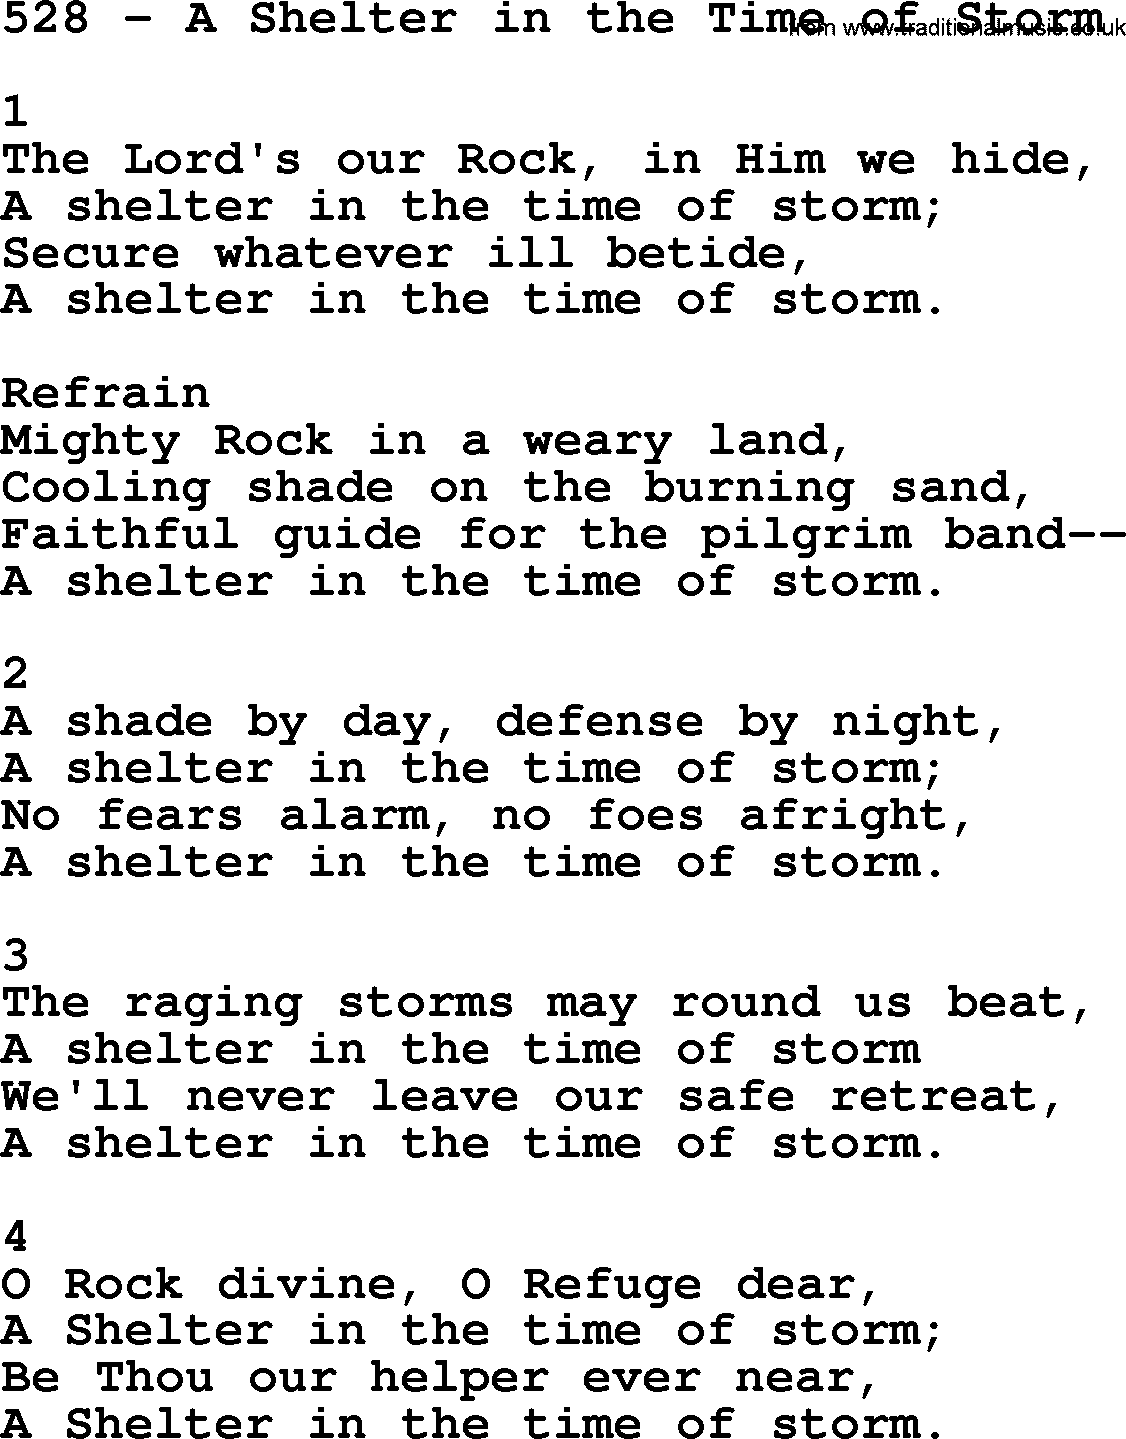 Complete Adventis Hymnal, title: 528-A Shelter In The Time Of Storm, with lyrics, midi, mp3, powerpoints(PPT) and PDF,